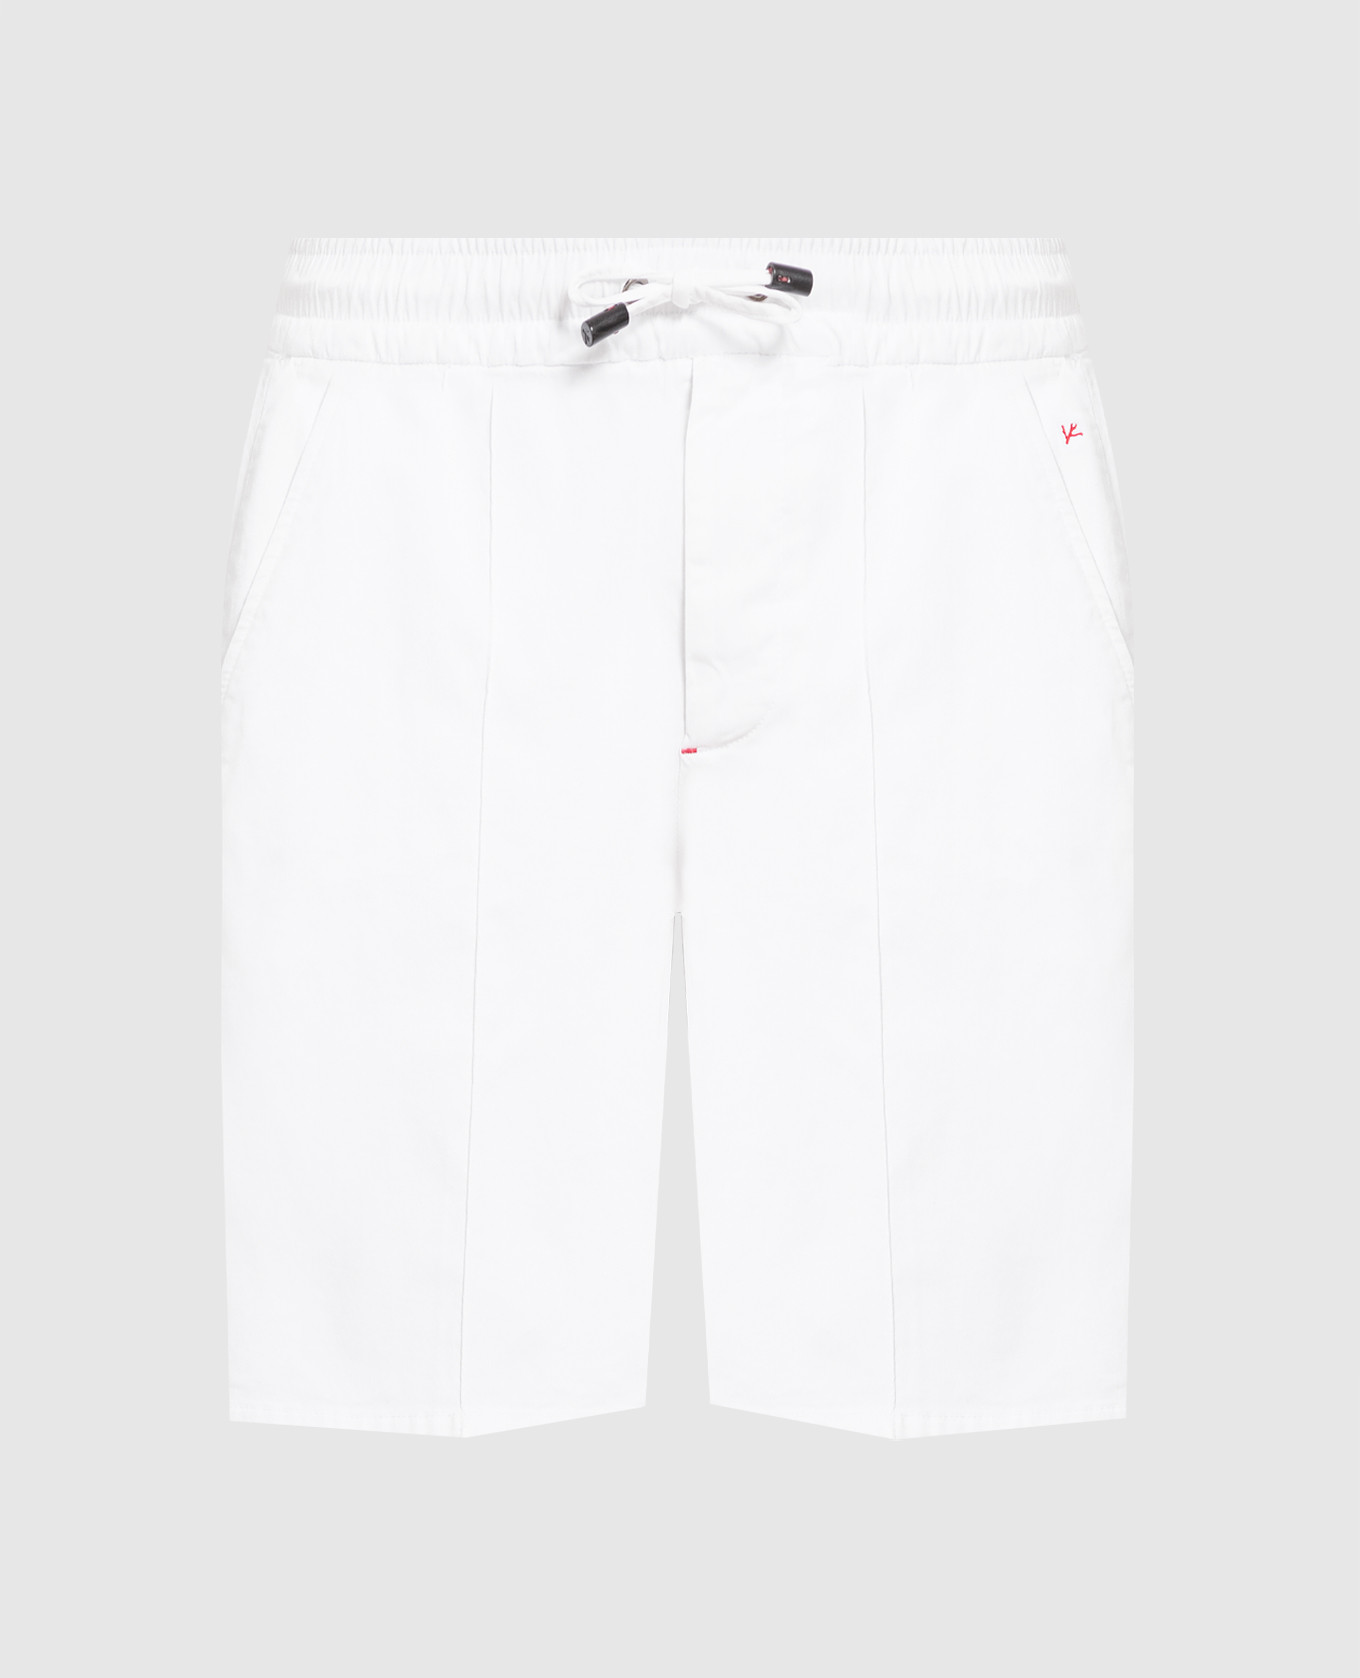 White shorts with logo embroidery